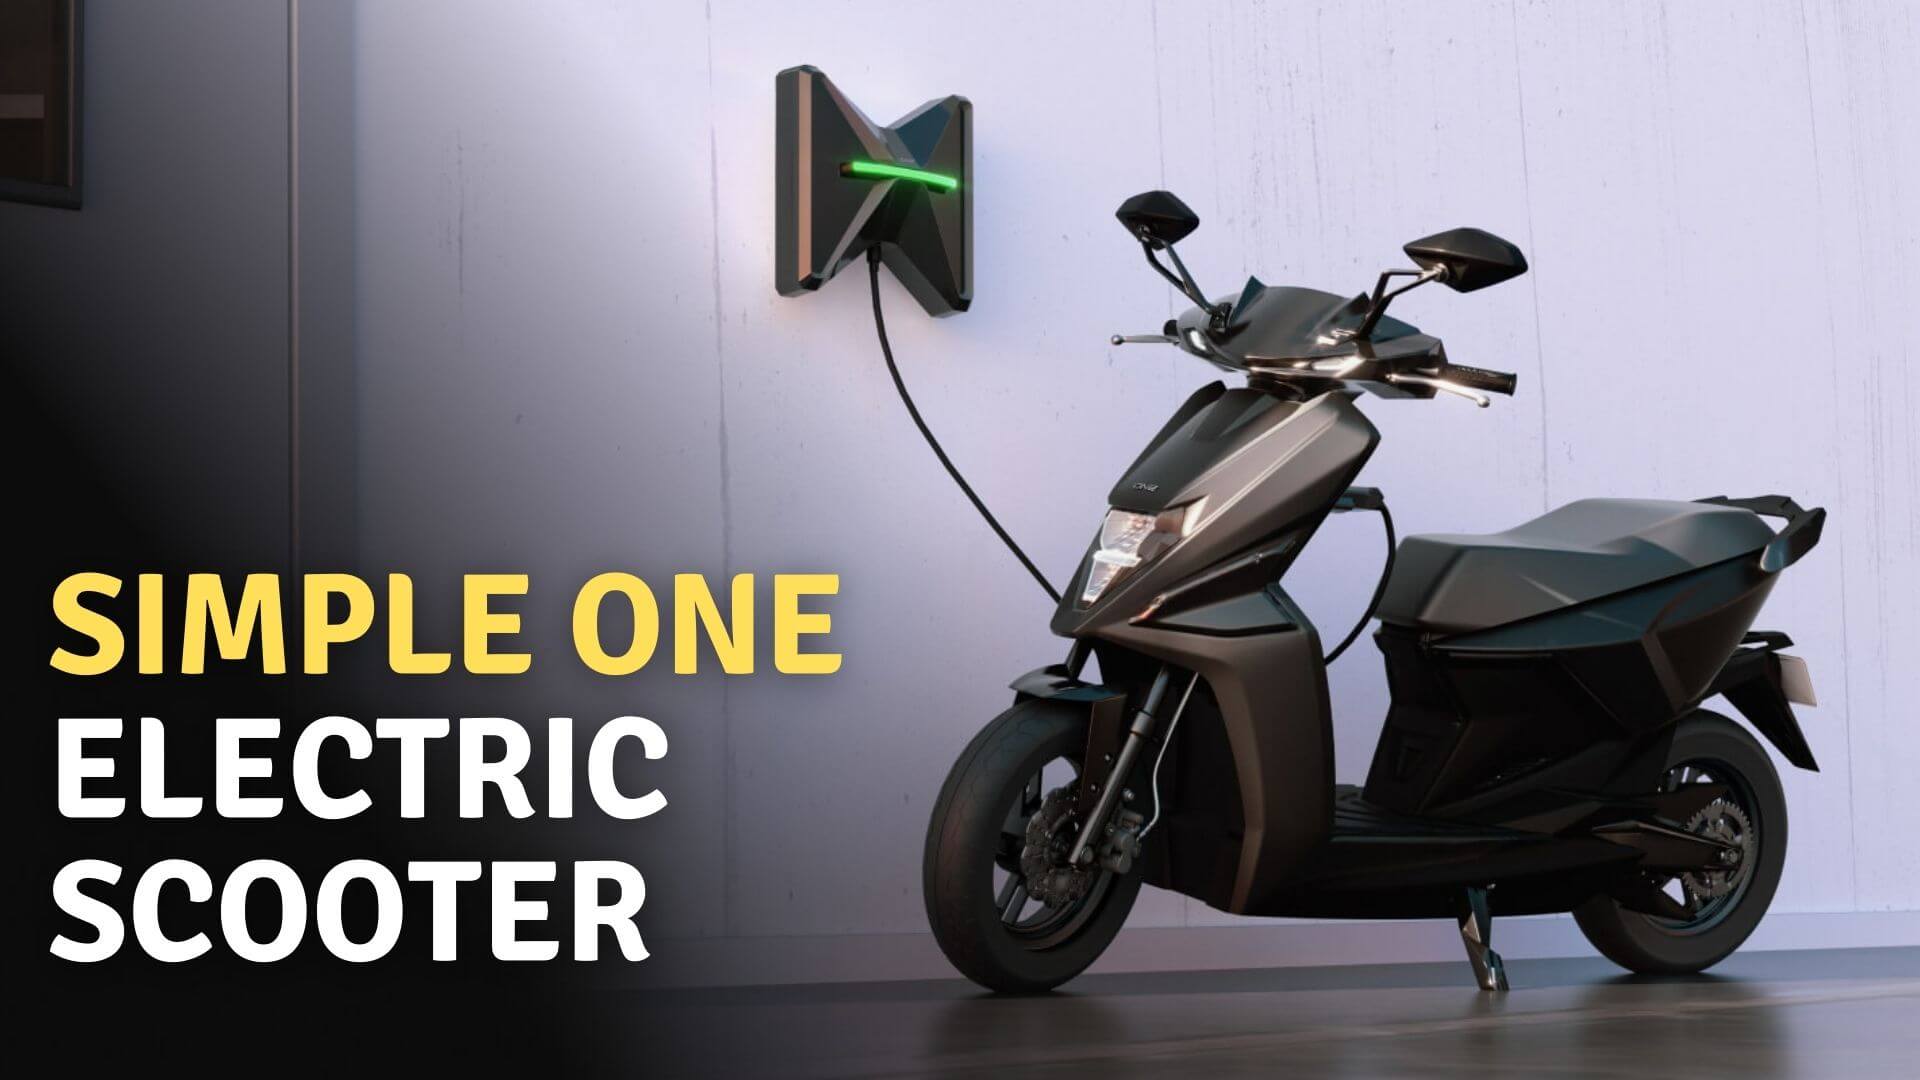 https://e-vehicleinfo.com/simple-one-electric-scooter-price-range-and-top-speed/